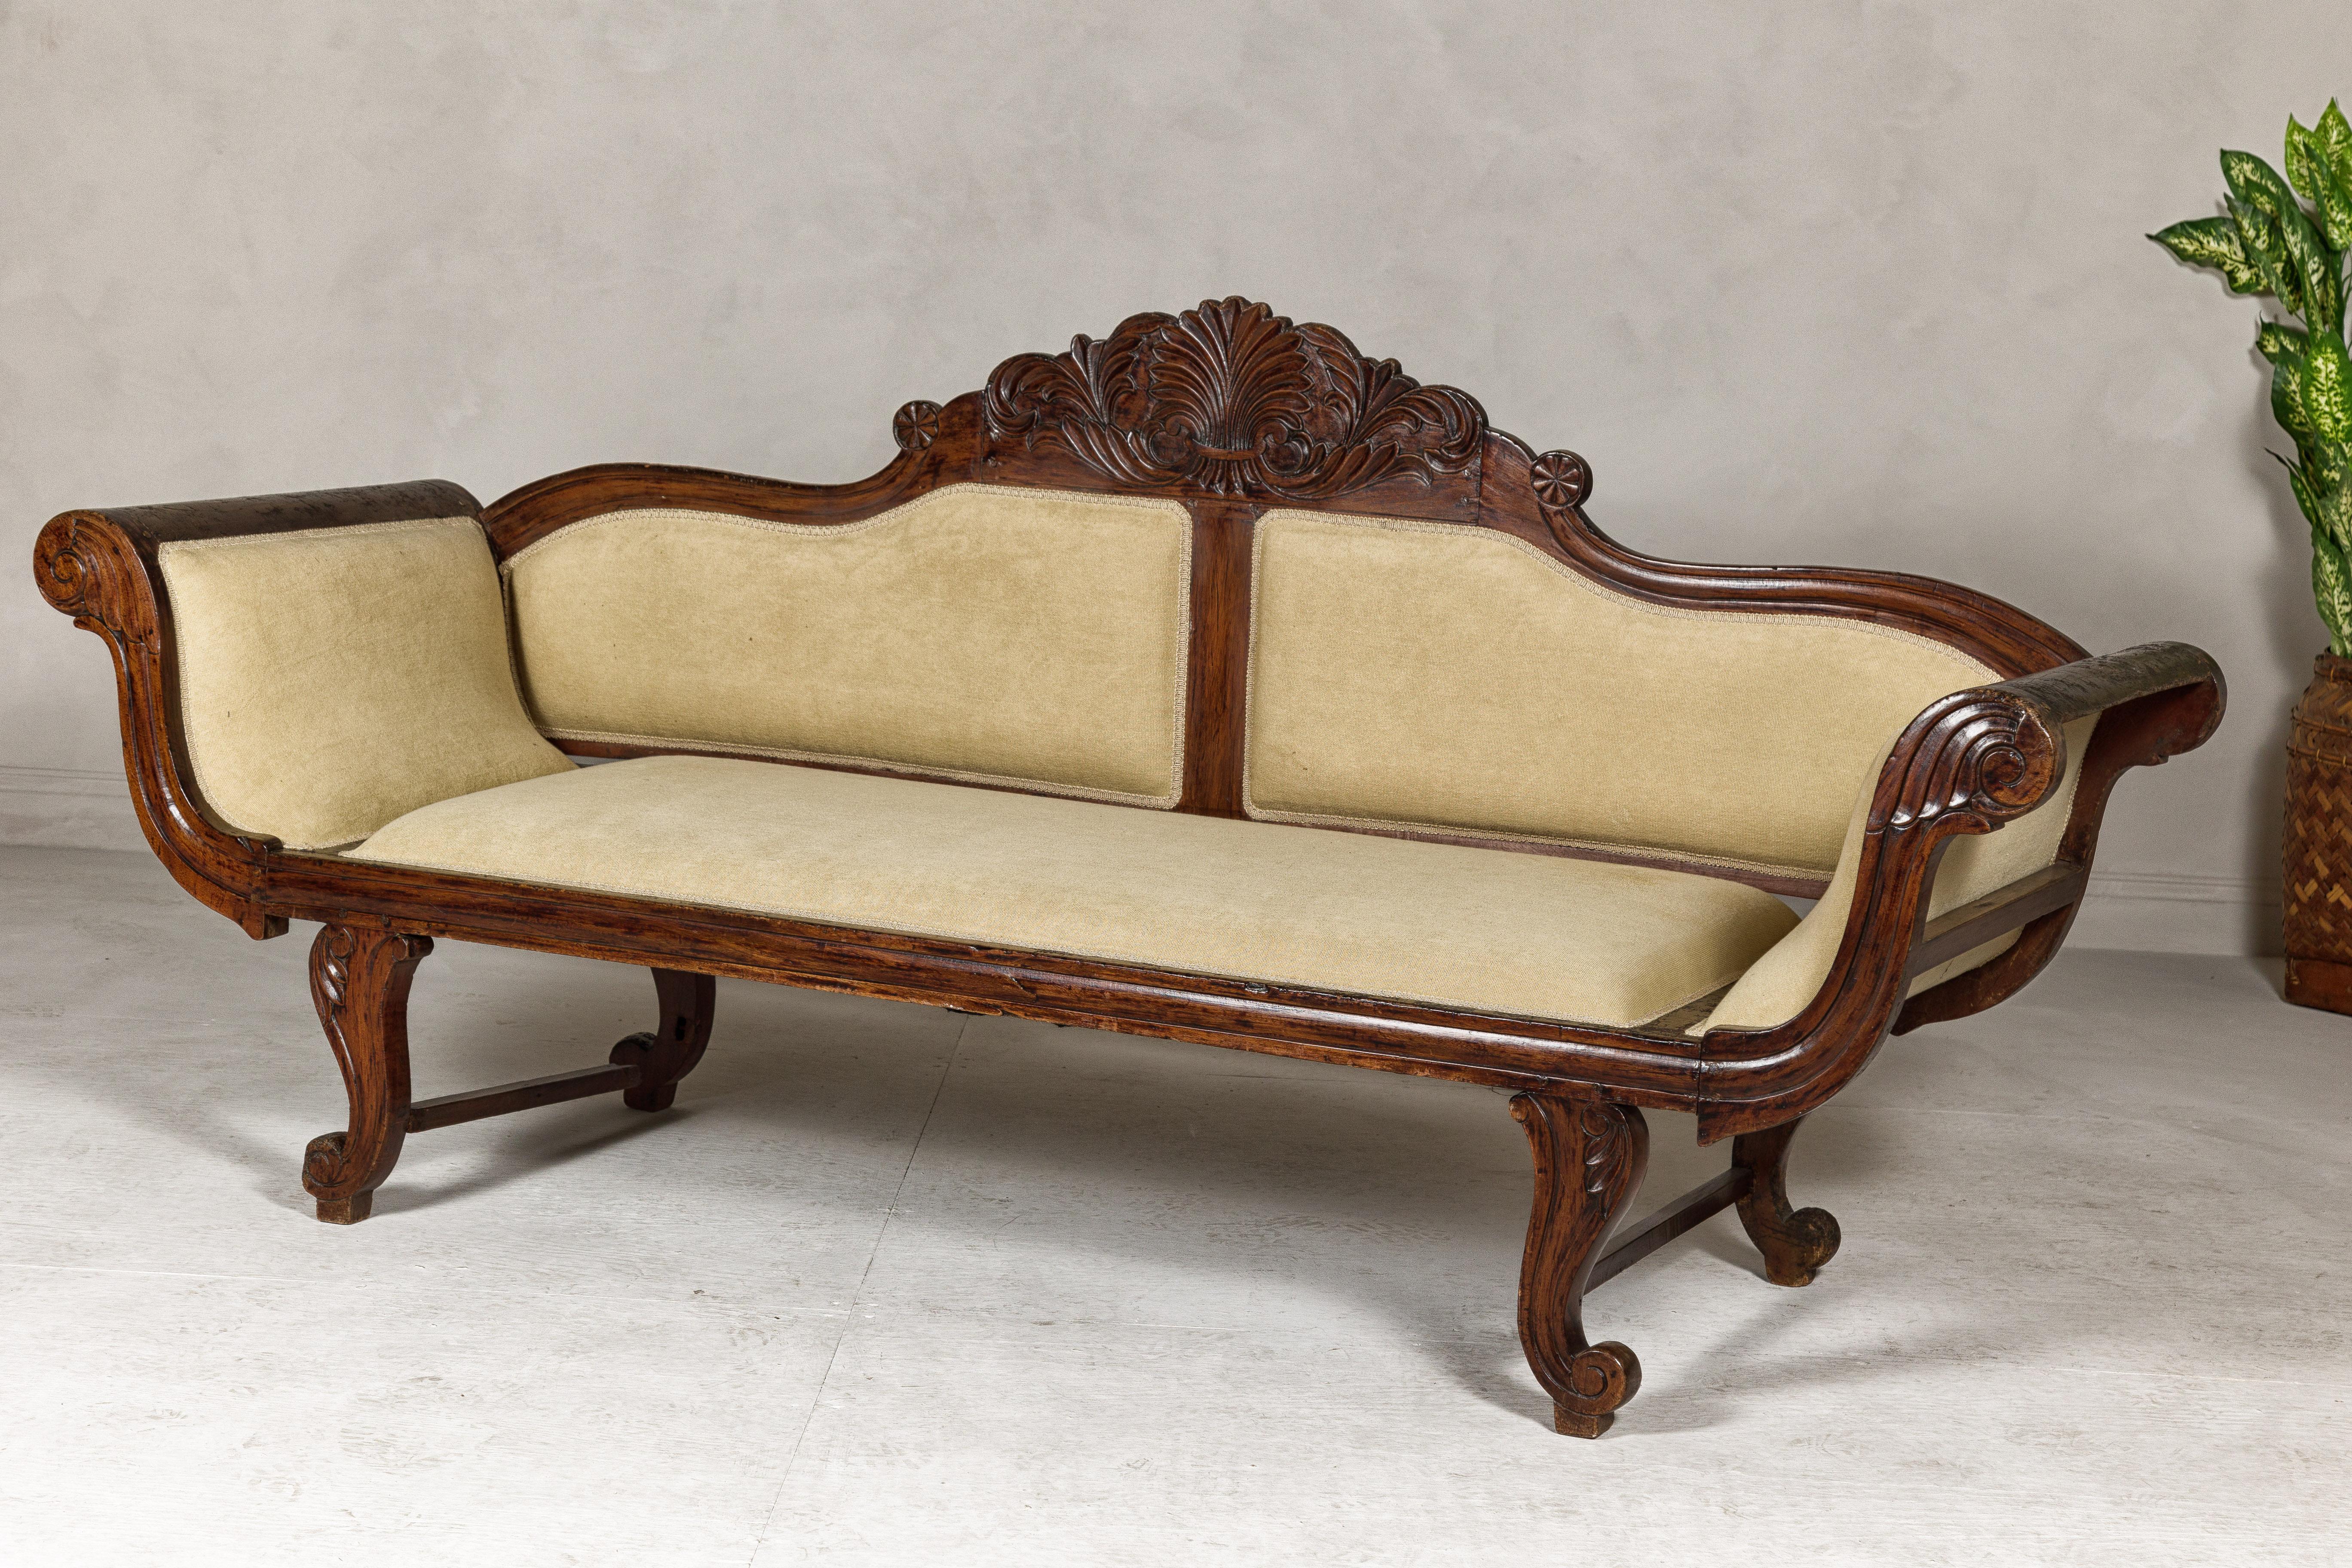 Dutch Colonial Wooden Settee with Carved Crest and Out-Scrolling Arms For Sale 4